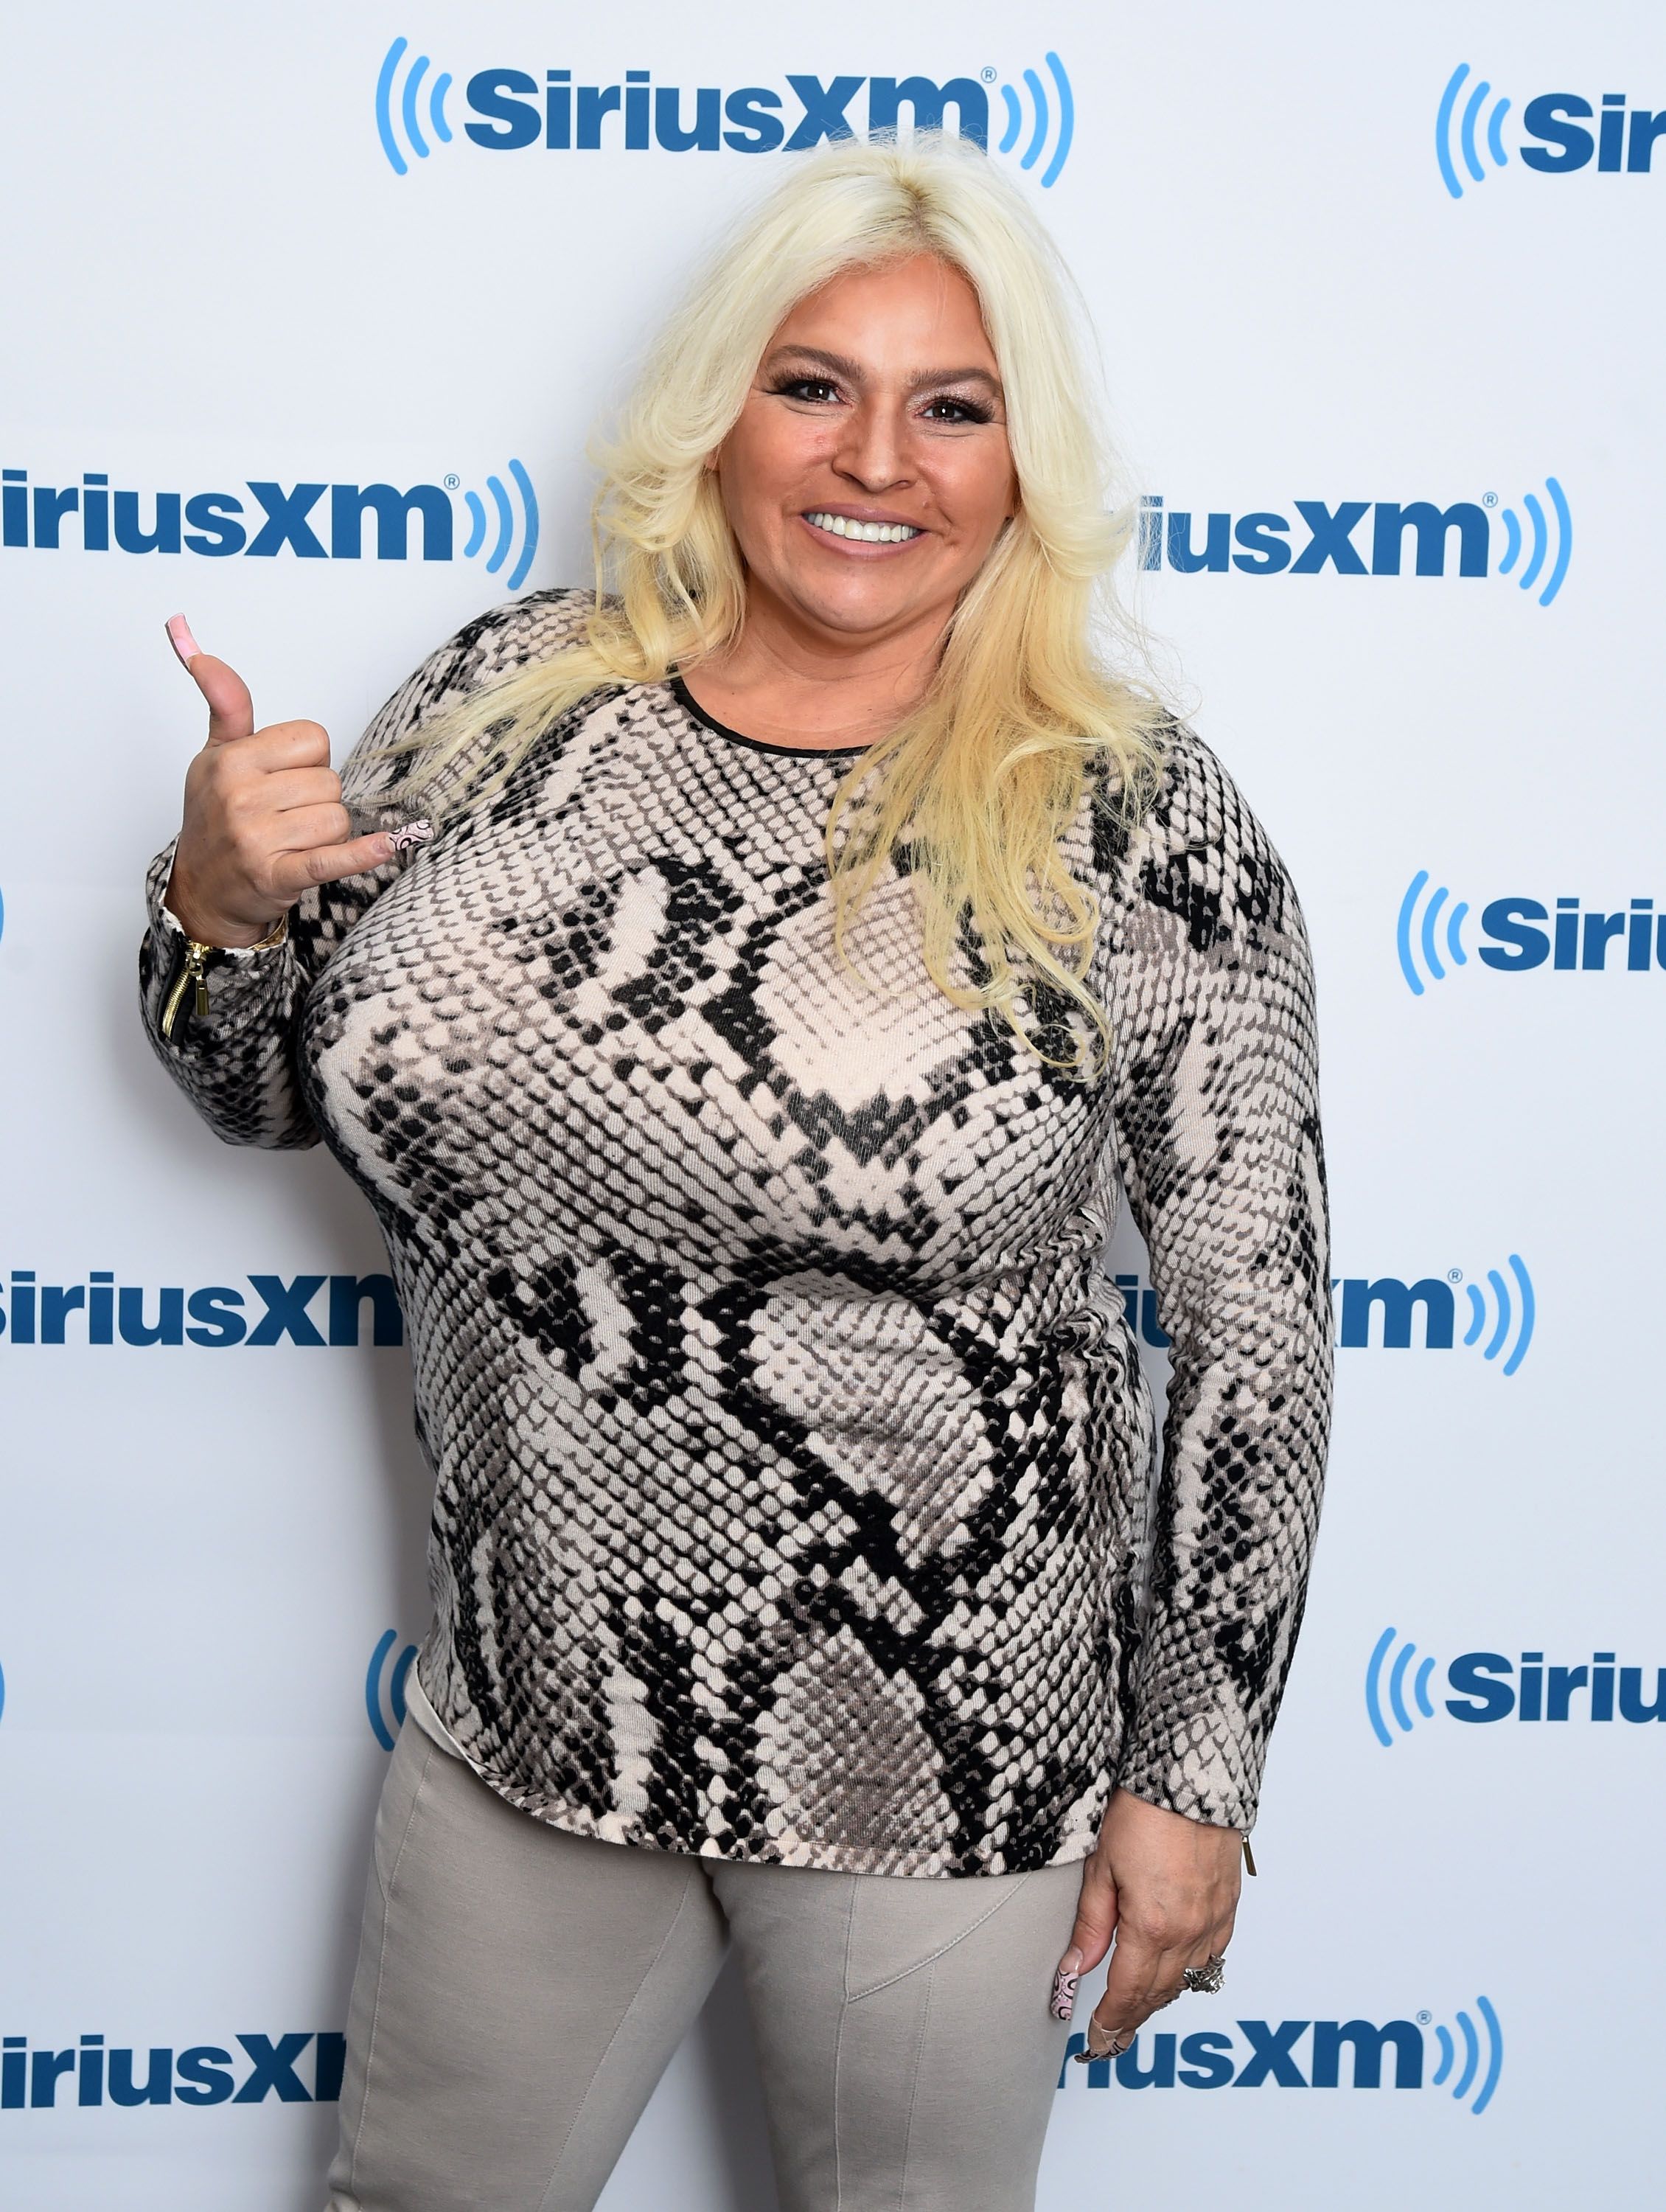 Beth Chapman at the SiriusXM Studios on April 24, 2015 | Photo: Getty images